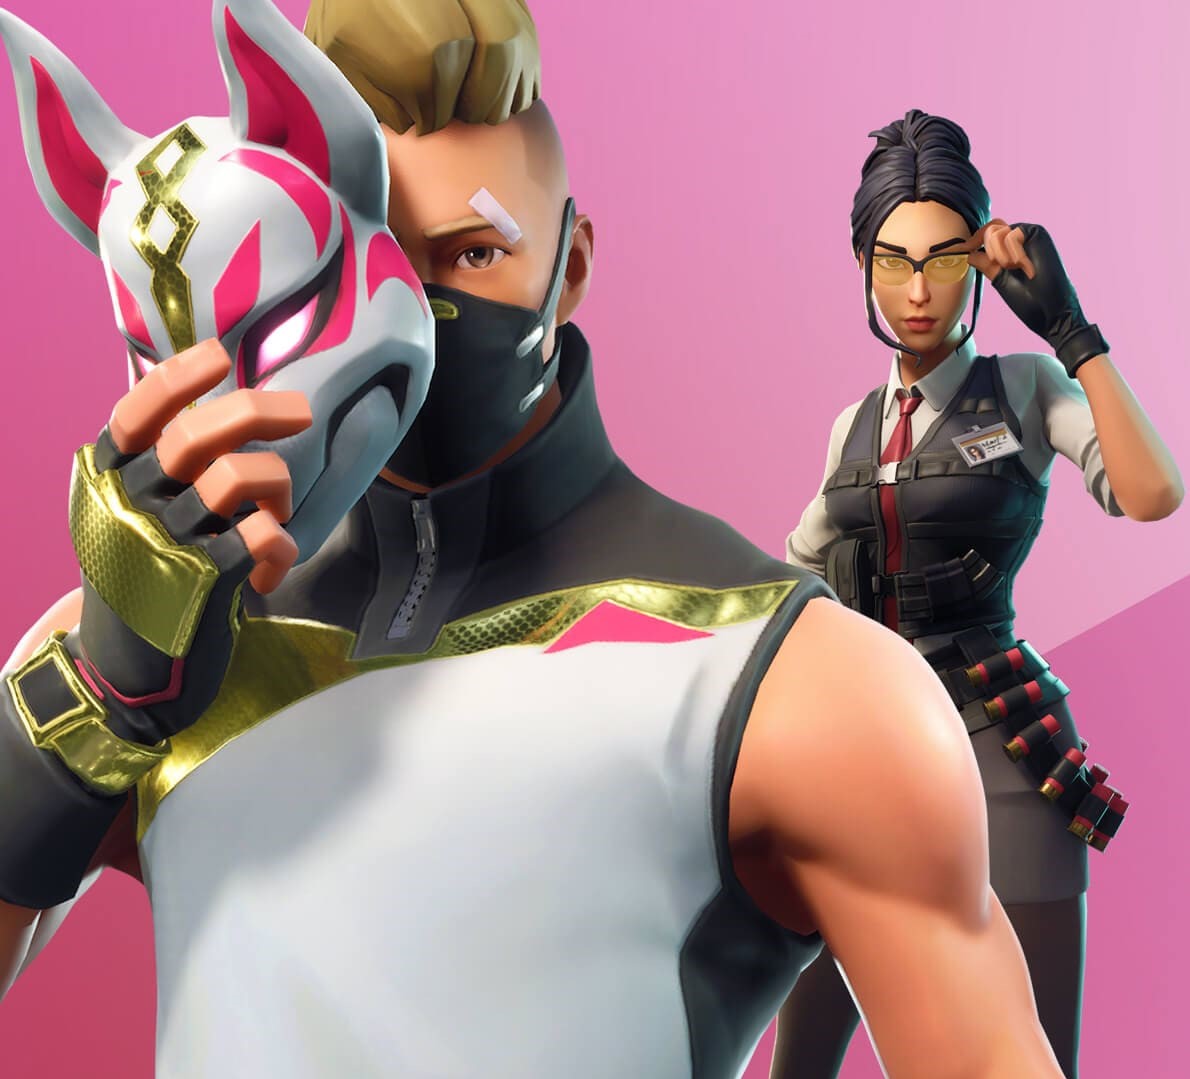 Fortnite characters in front of pink background